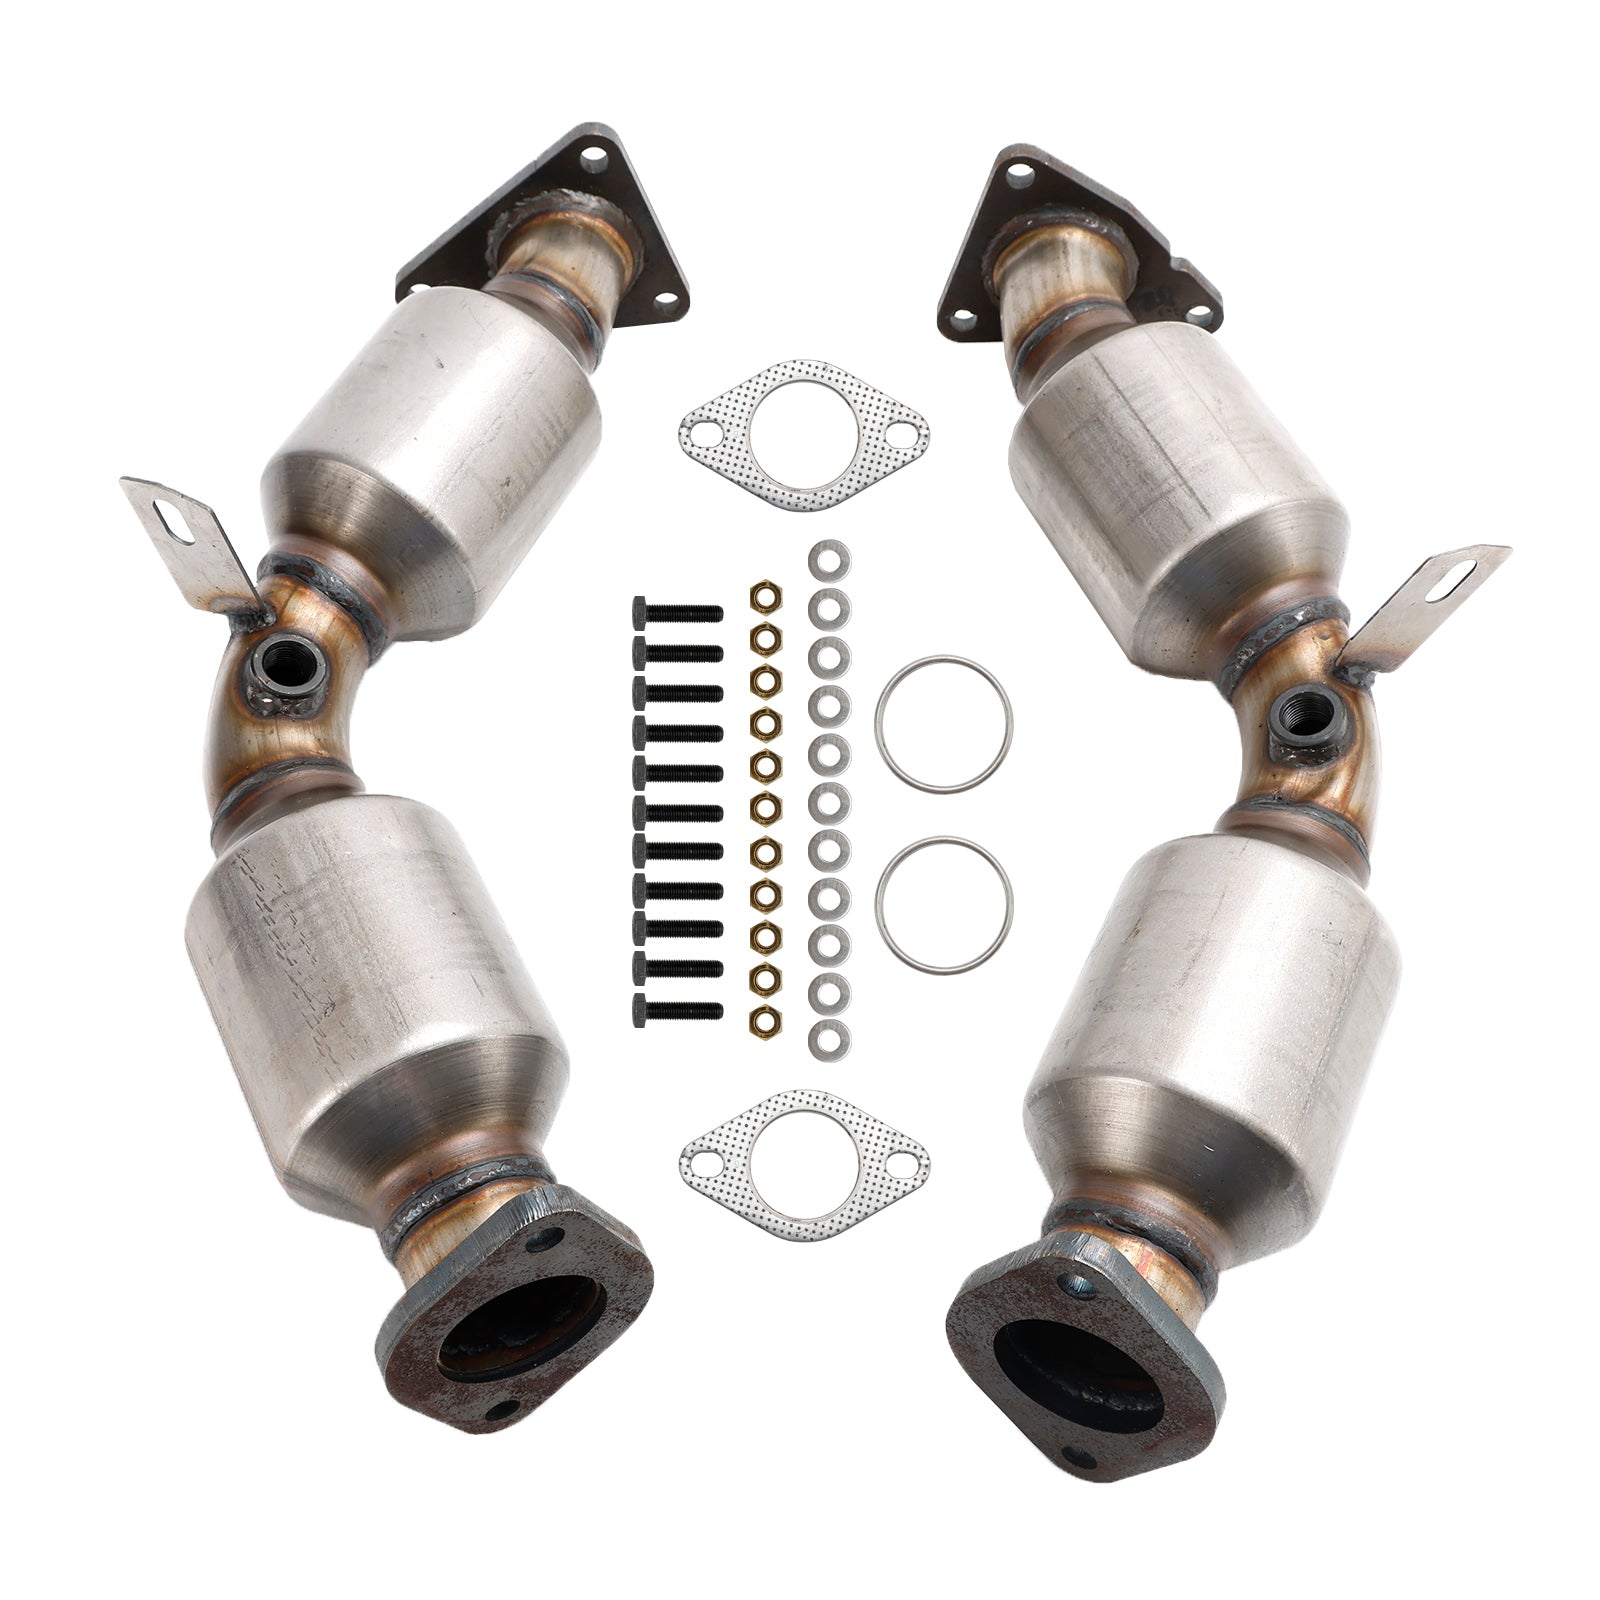 Infiniti 2008-2013 G37 3.7L 12H5484 12H5485 Catalytic Converters Front Both Sides